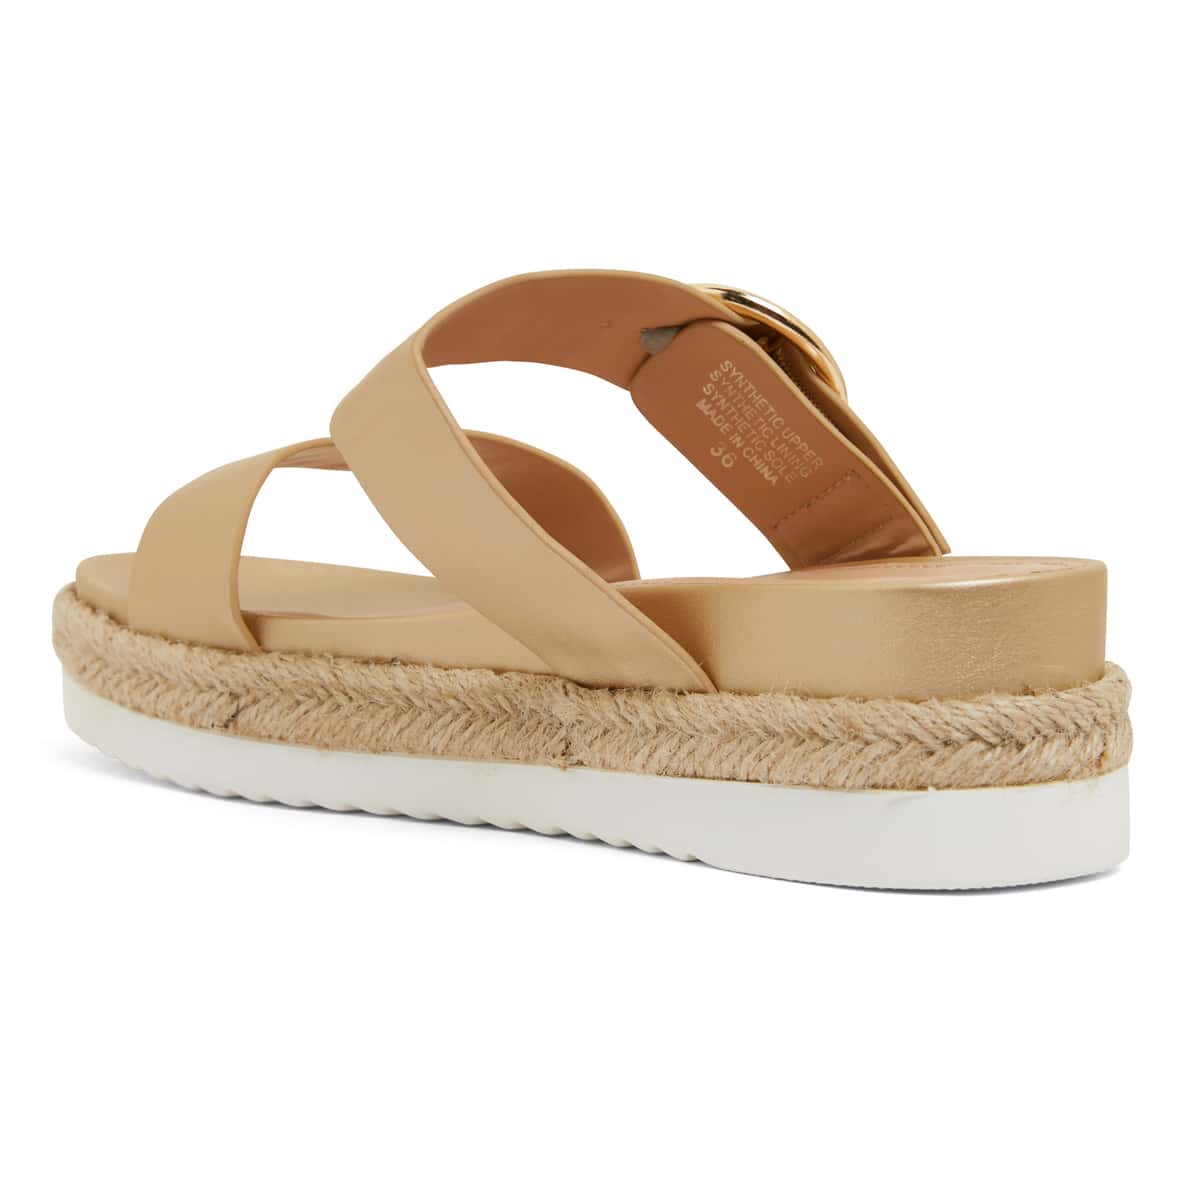 Warsaw Espadrille in Soft Gold Smooth